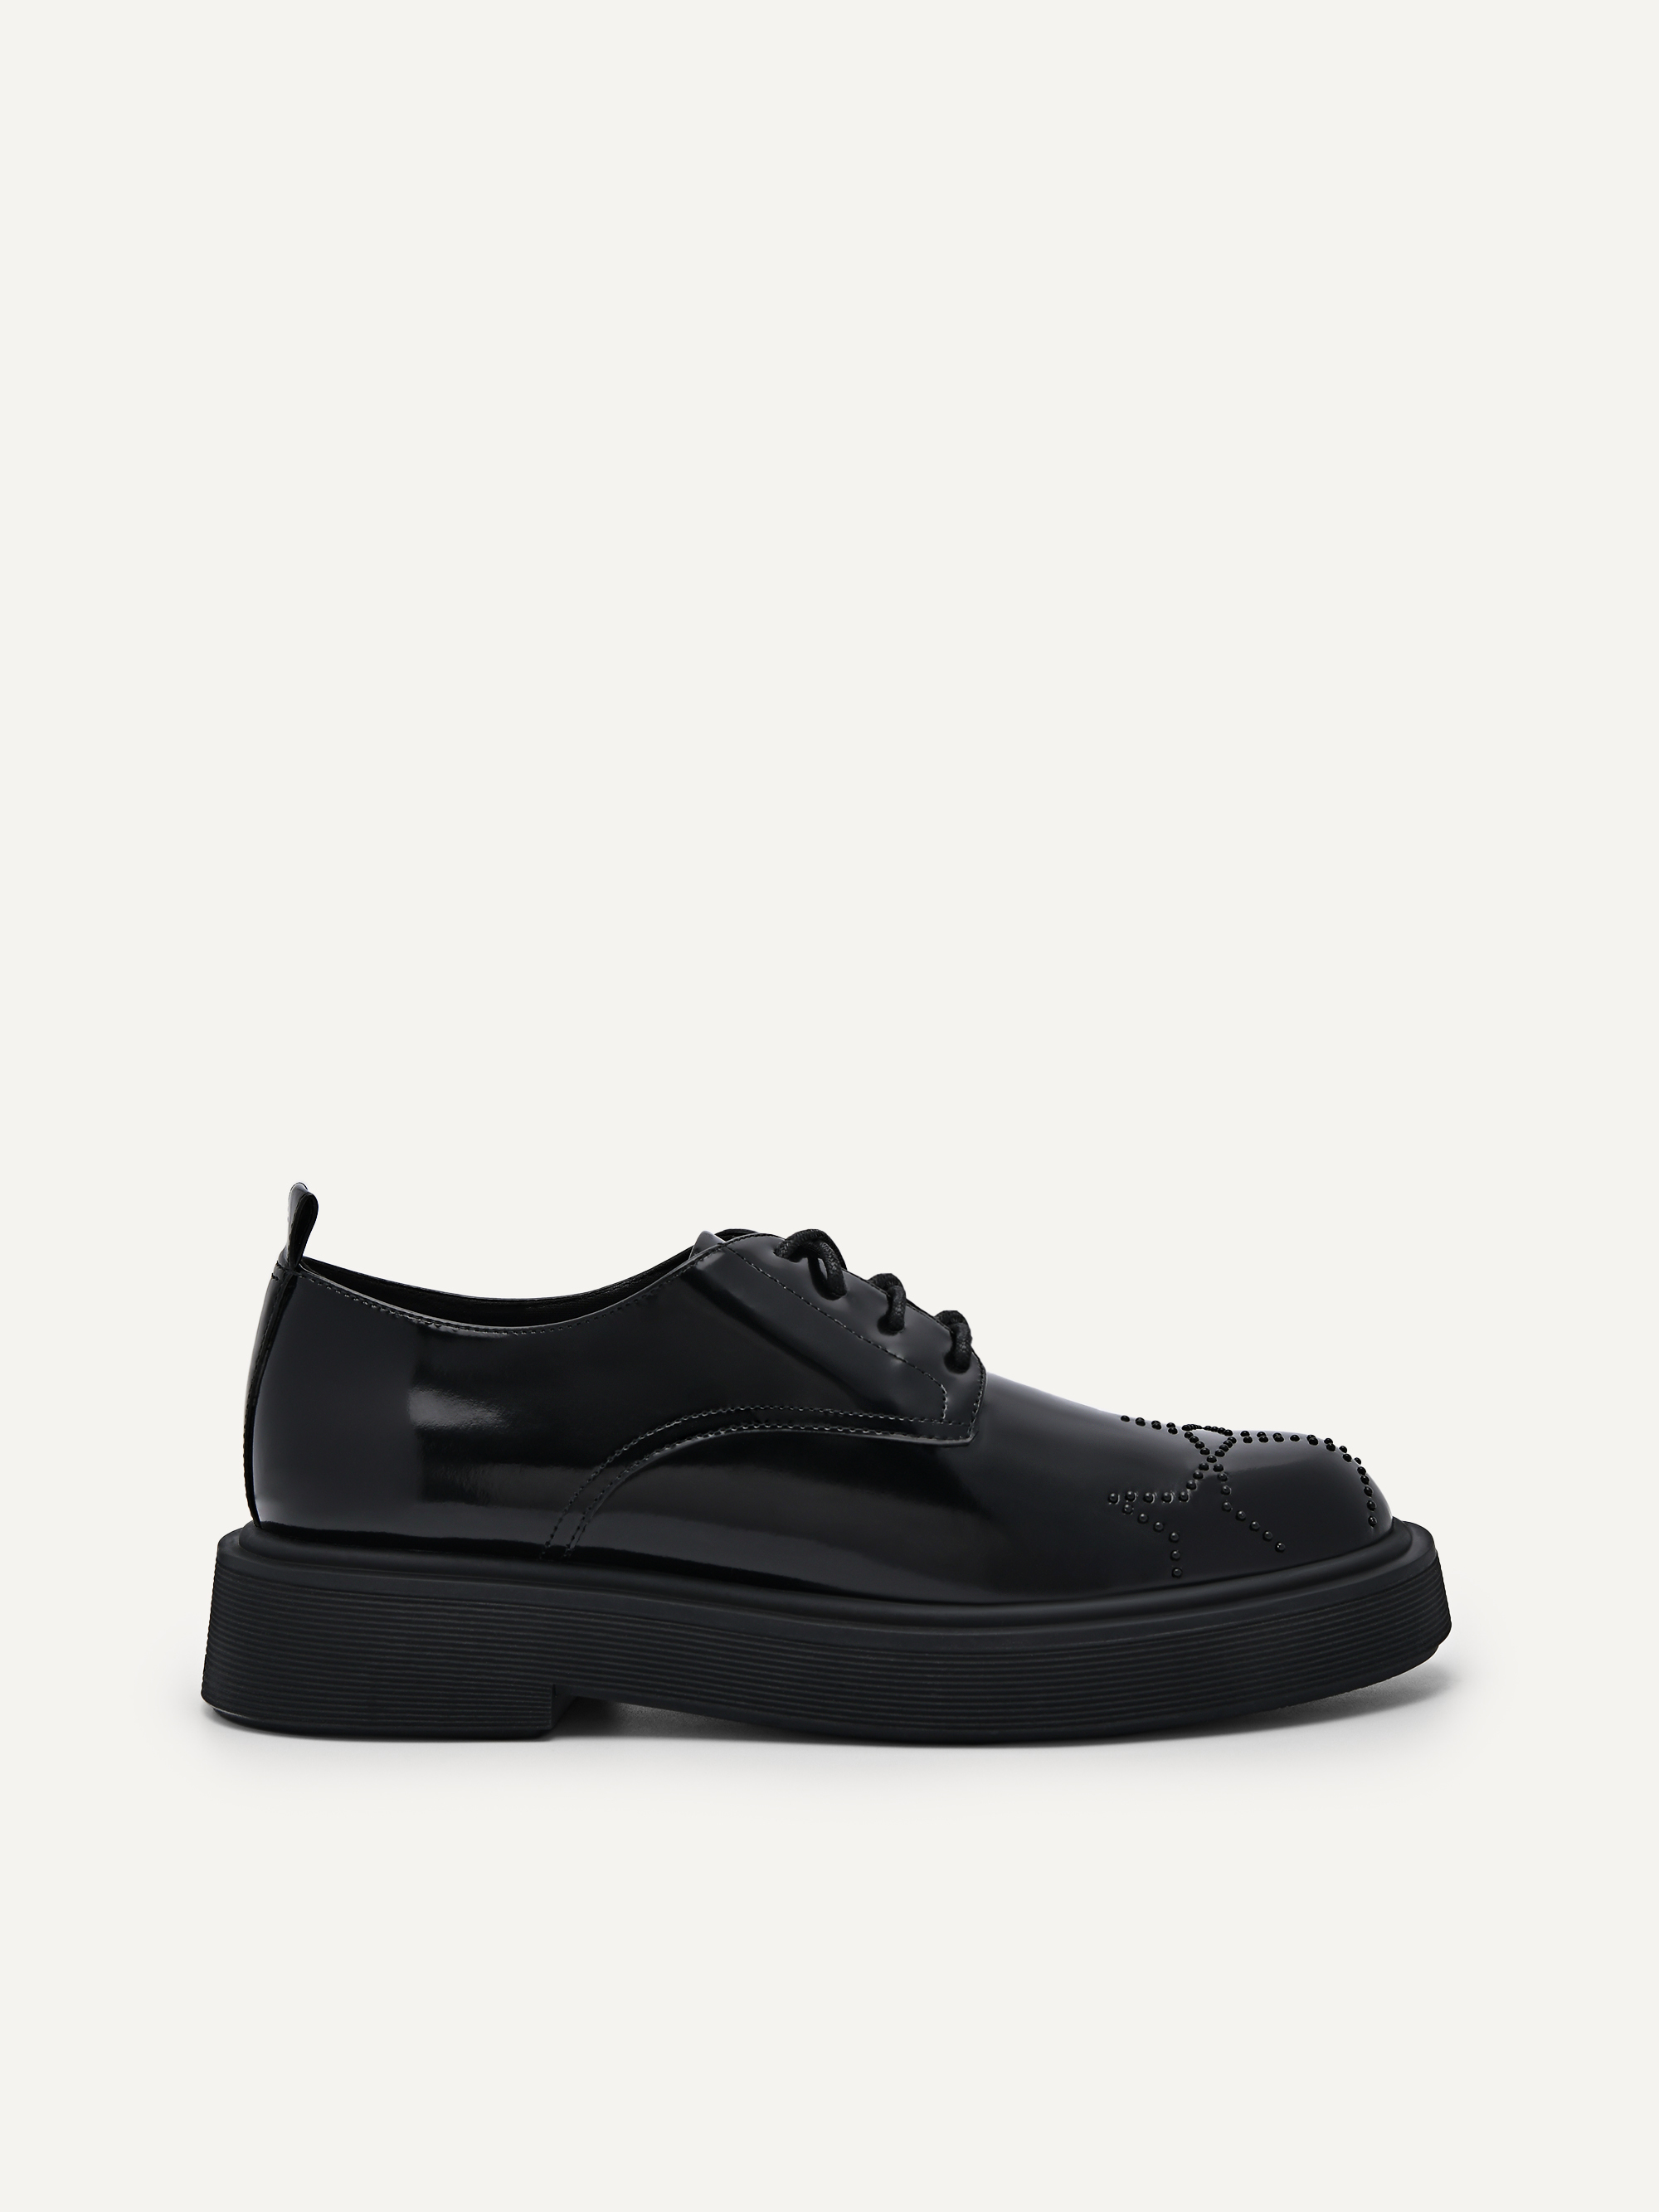 Black Maisie Leather Derby Shoes - PEDRO SG